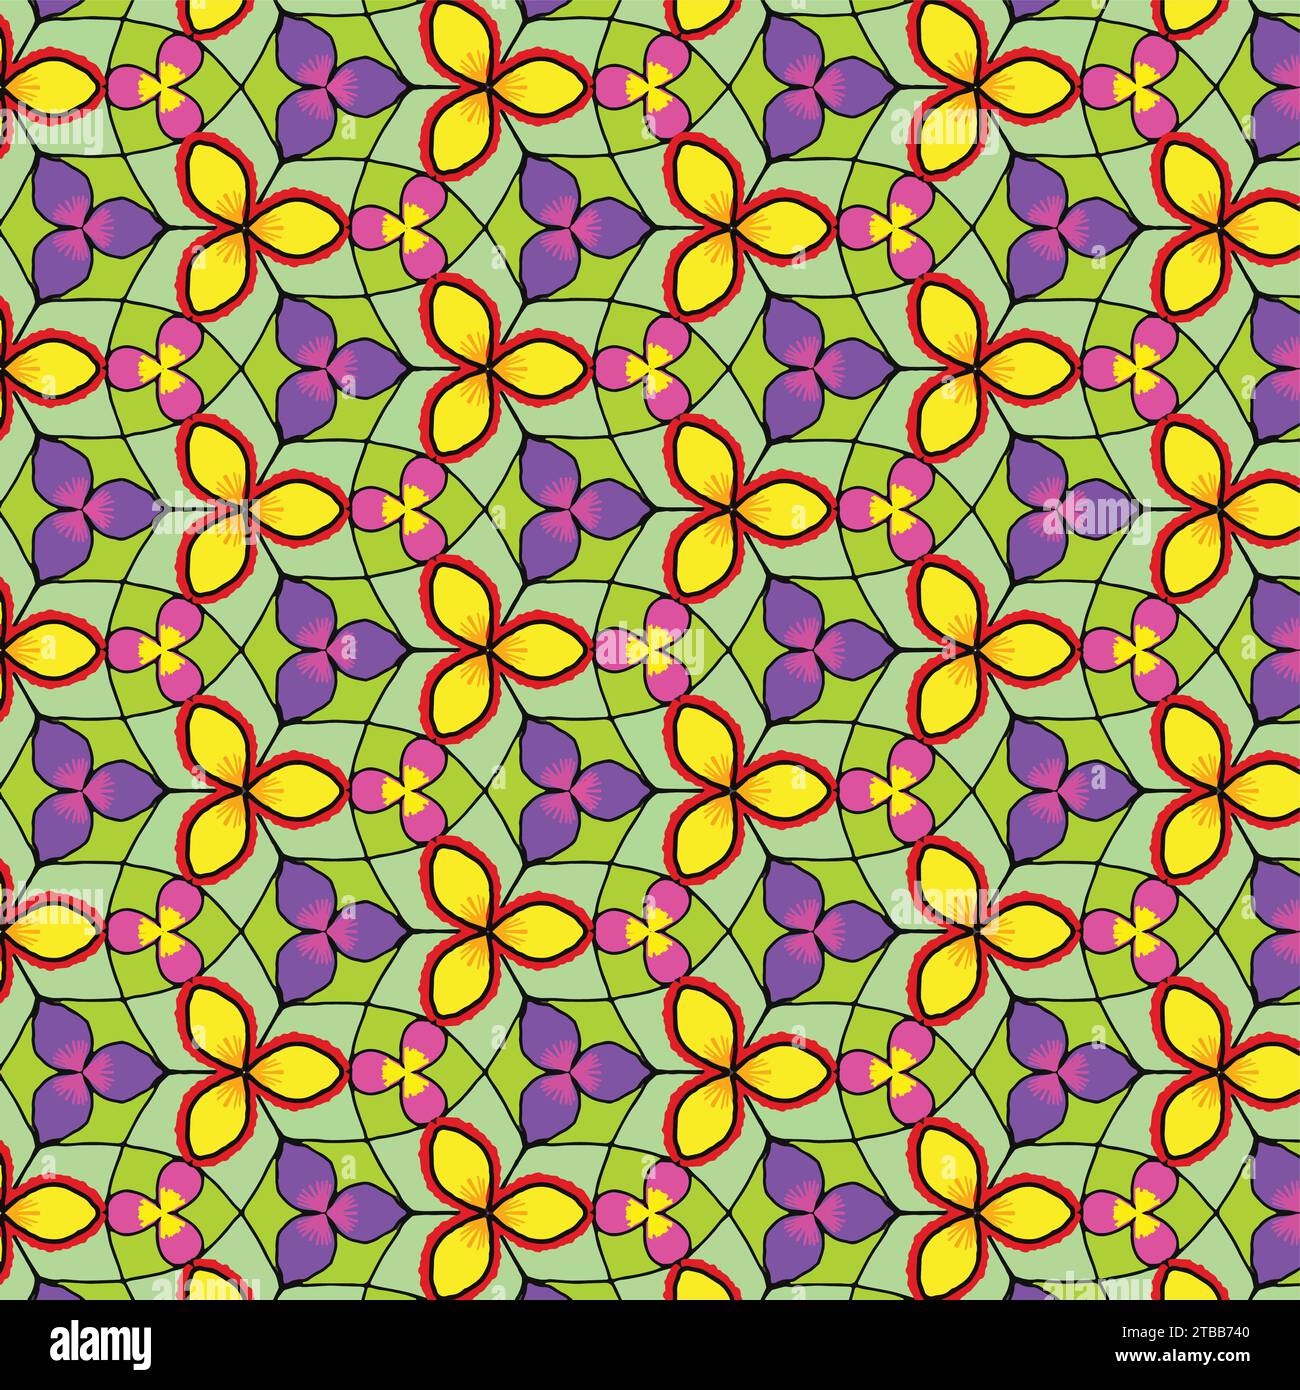 A vibrant seamless pattern of stylized purple and yellow flowers with green leaves, reminiscent of Art Nouveau stained glass Stock Vector